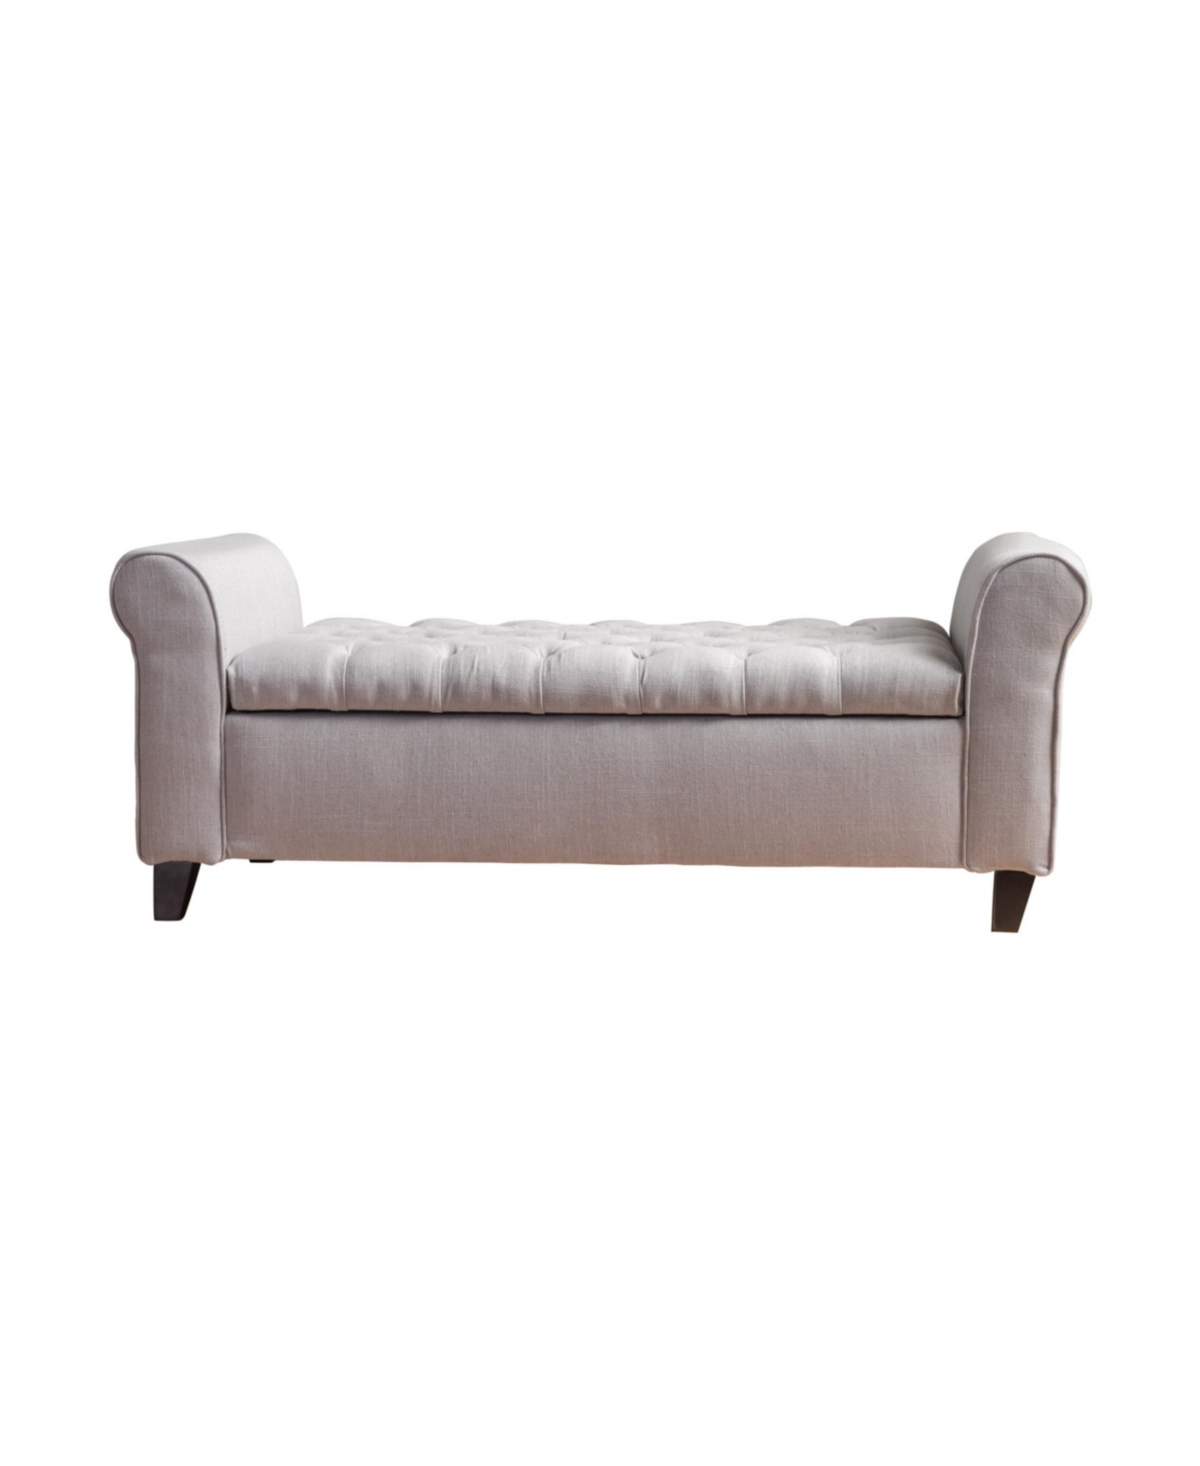 Noble House Keiko Armed Storage Bench In Light Gray